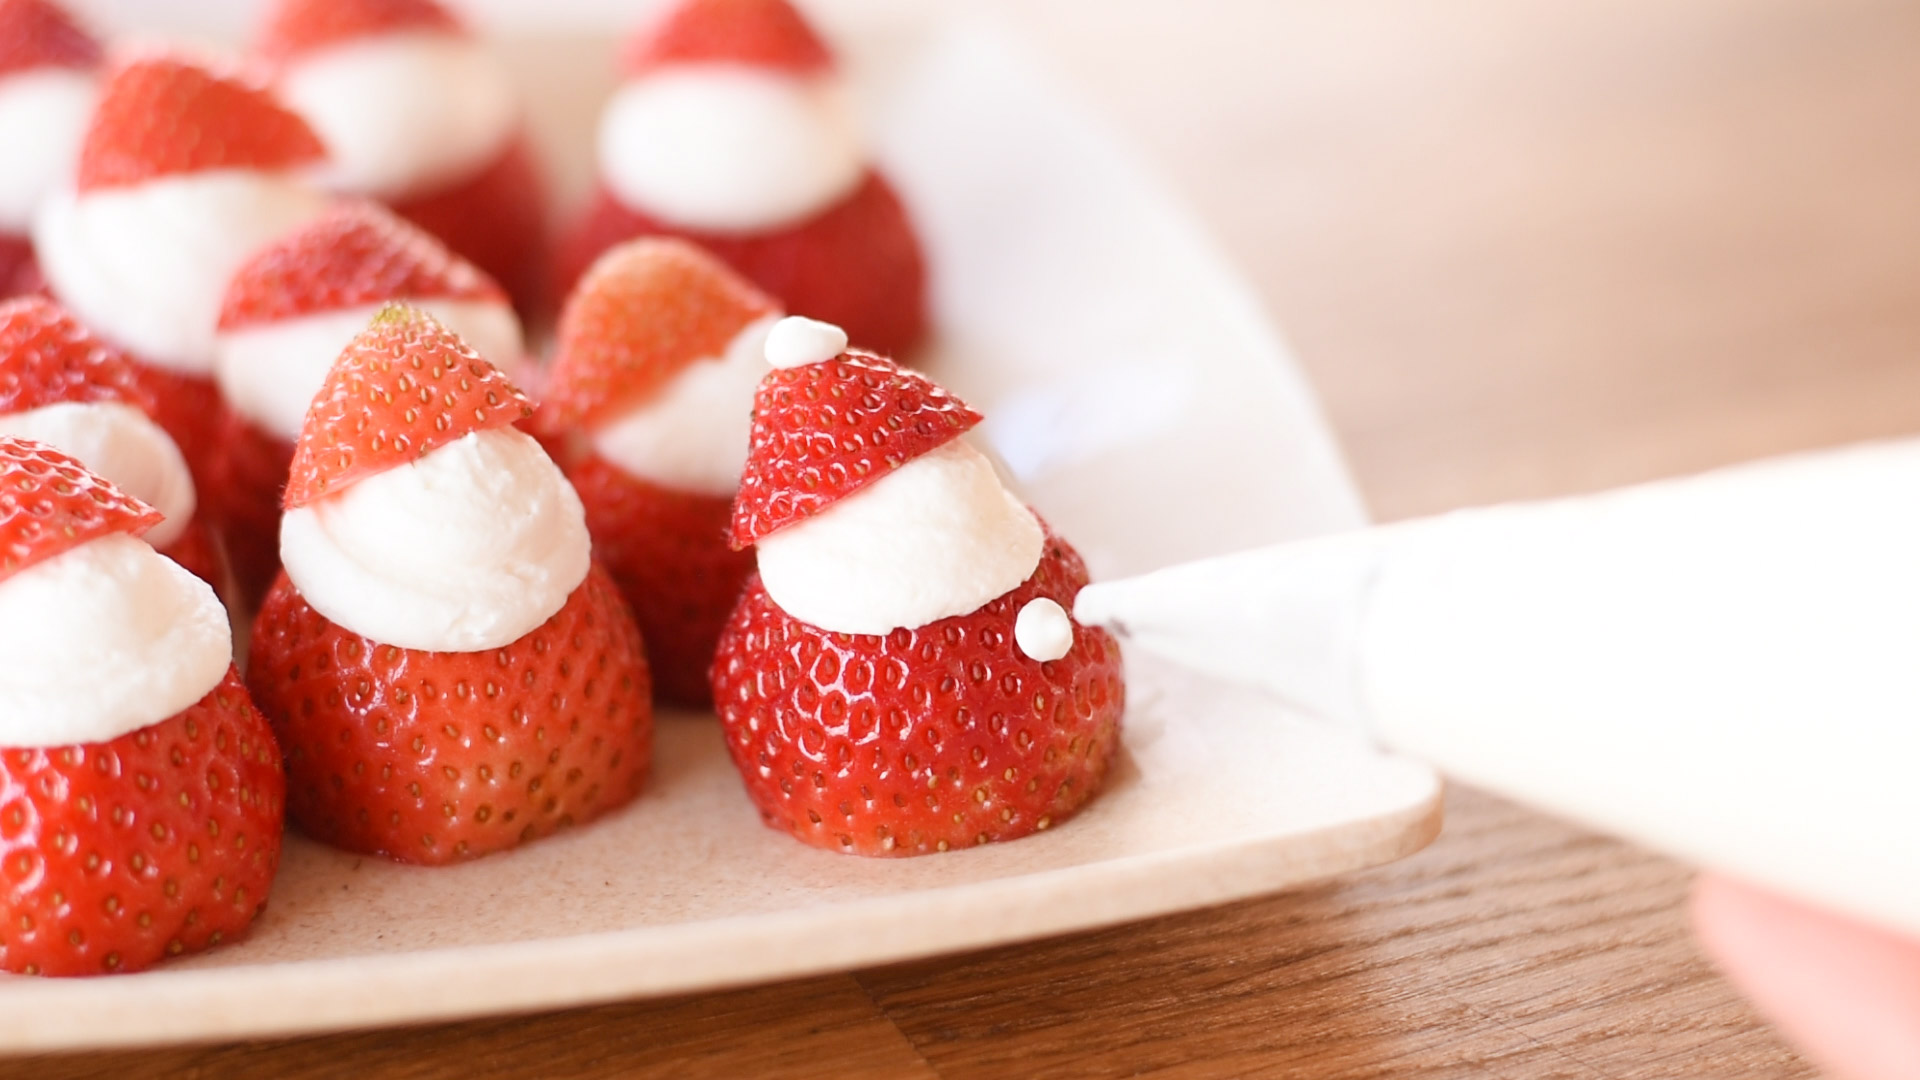 Strawberry Santas being decorated with whipped cream buttons.